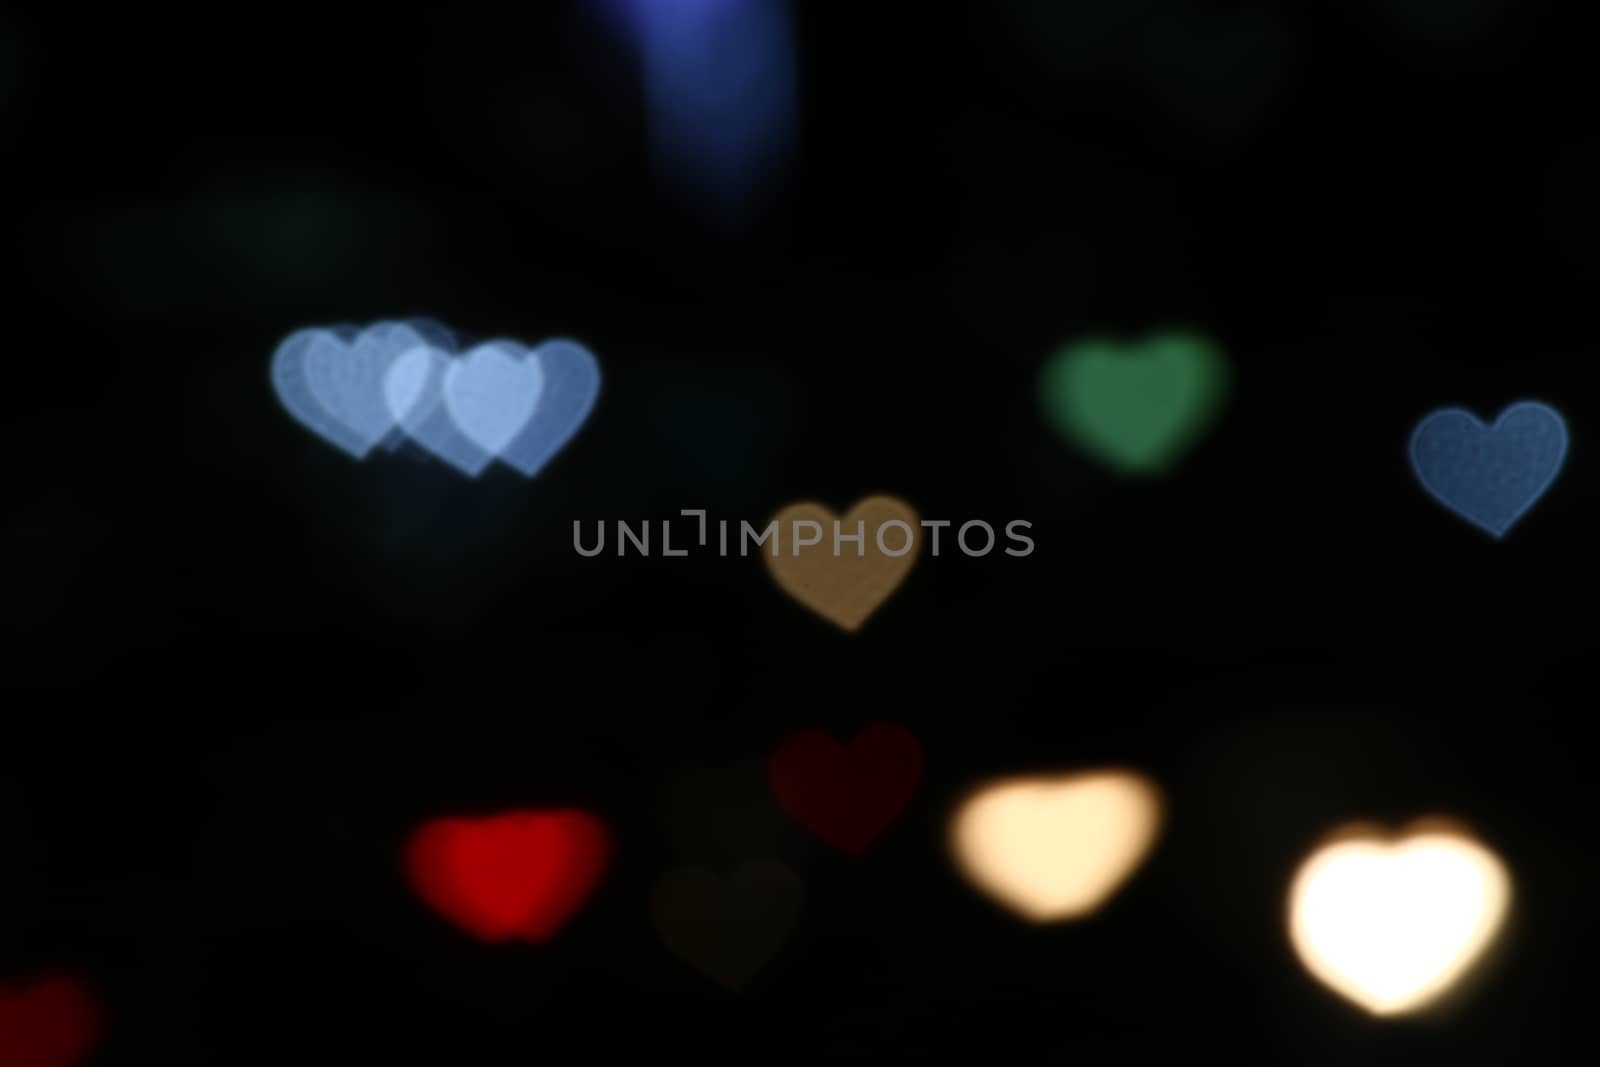 colorful heart-shaped on black background, lighting bokeh for wallpaper, blurred bokeh for valentine's day background, love pictures background, lighting heart shape soft at night time